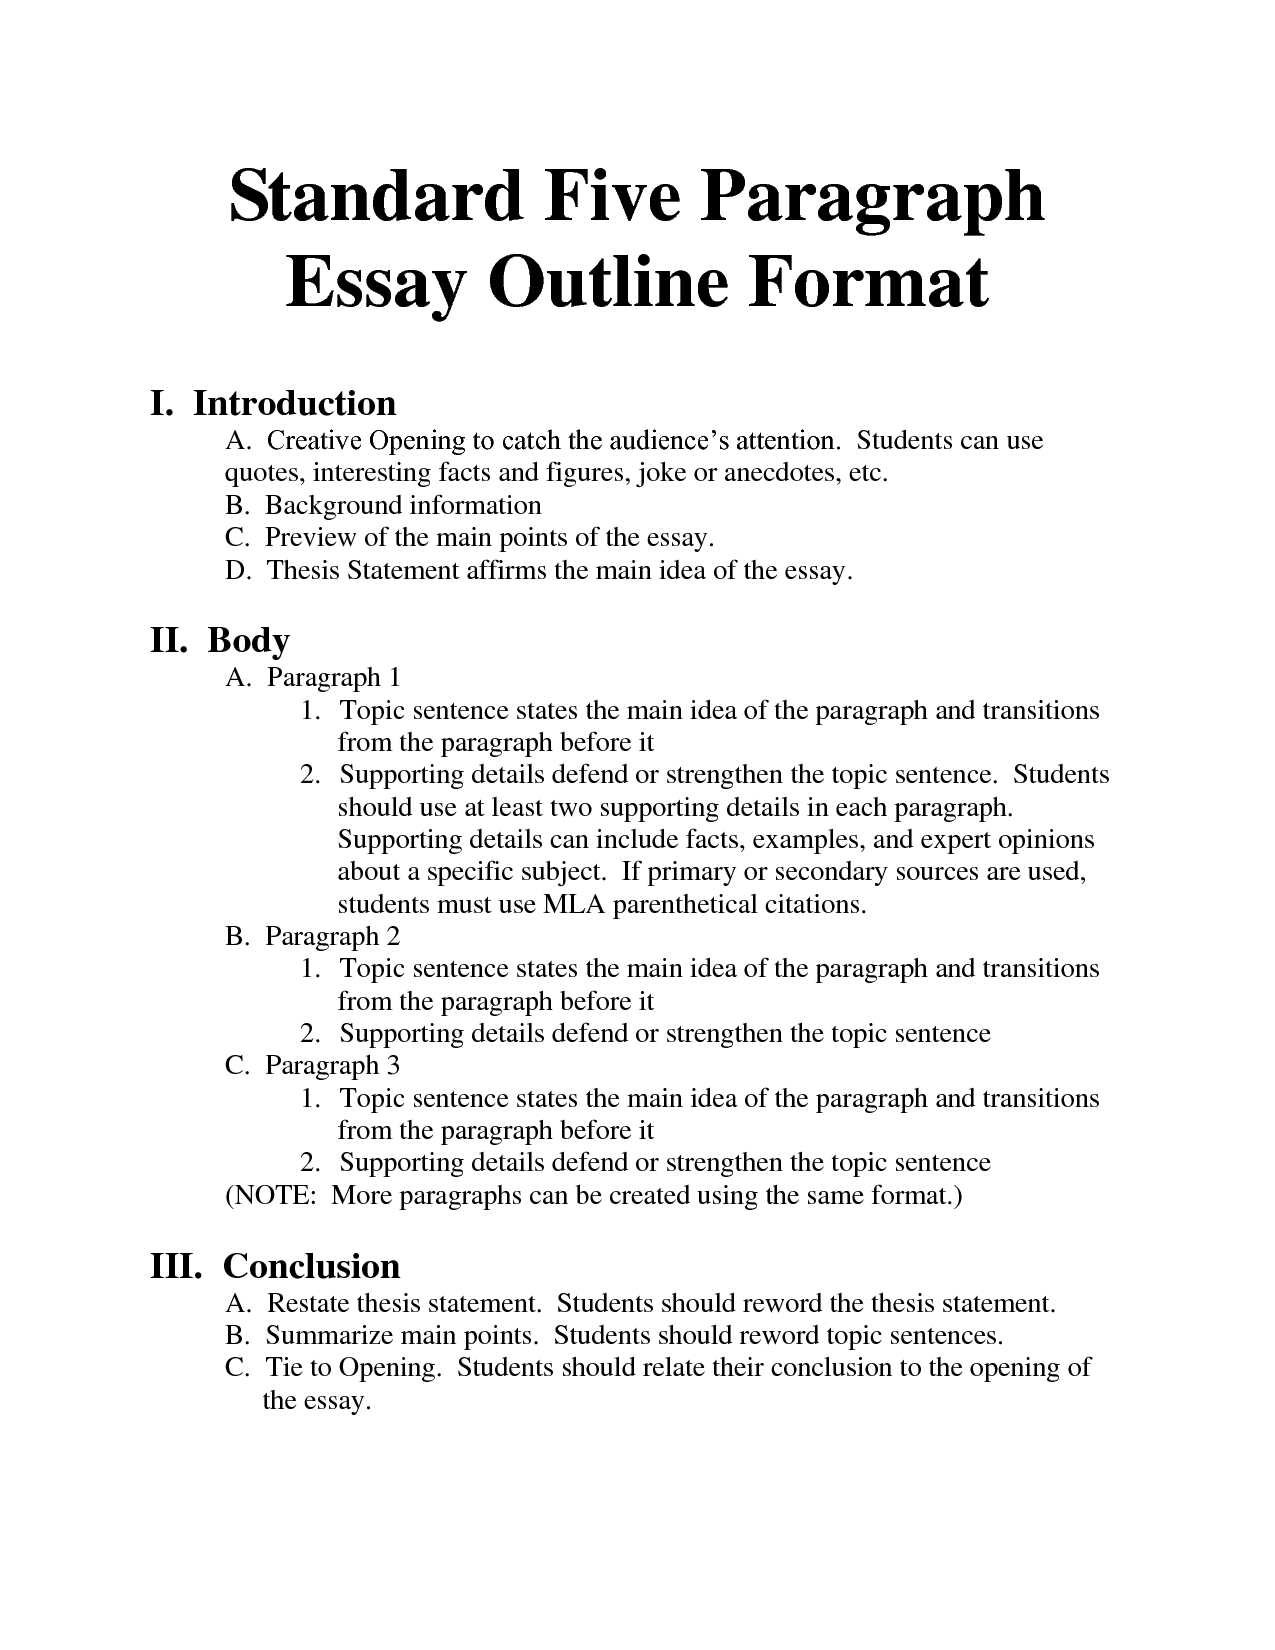 Critical Thinking Worksheets or Animal Cell Essay 6 Paragraph Essay format Paragraph Essay Outline